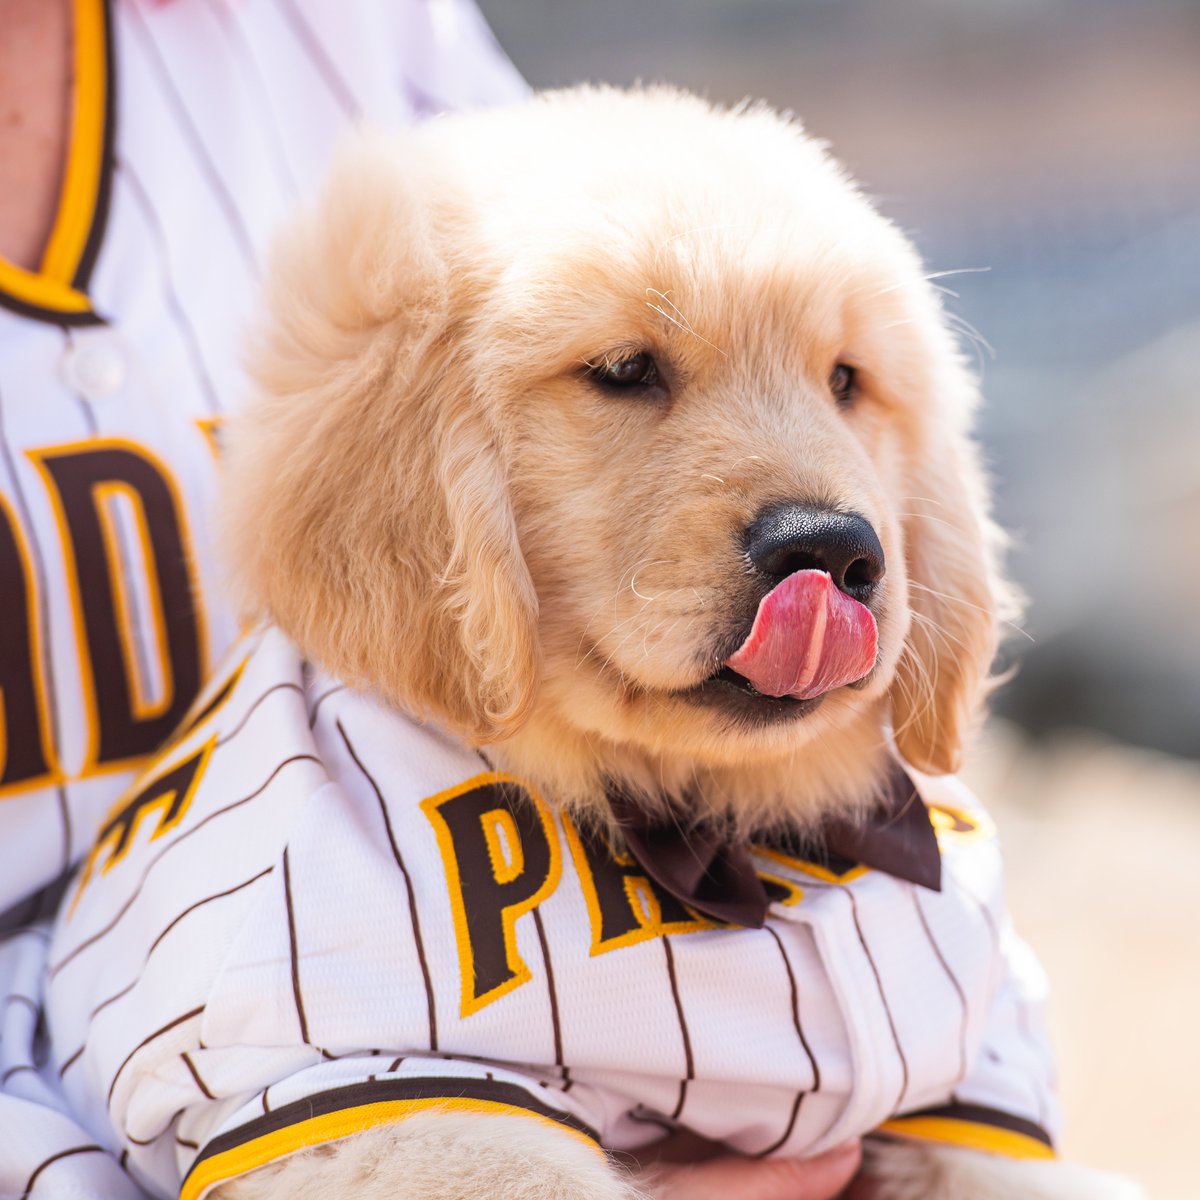 San Diego Padres on X: This squad right here > literally any other  squad 🥺 You can't have #NationalDogDay without some Paw Squad pics 💛🐶🤎   / X